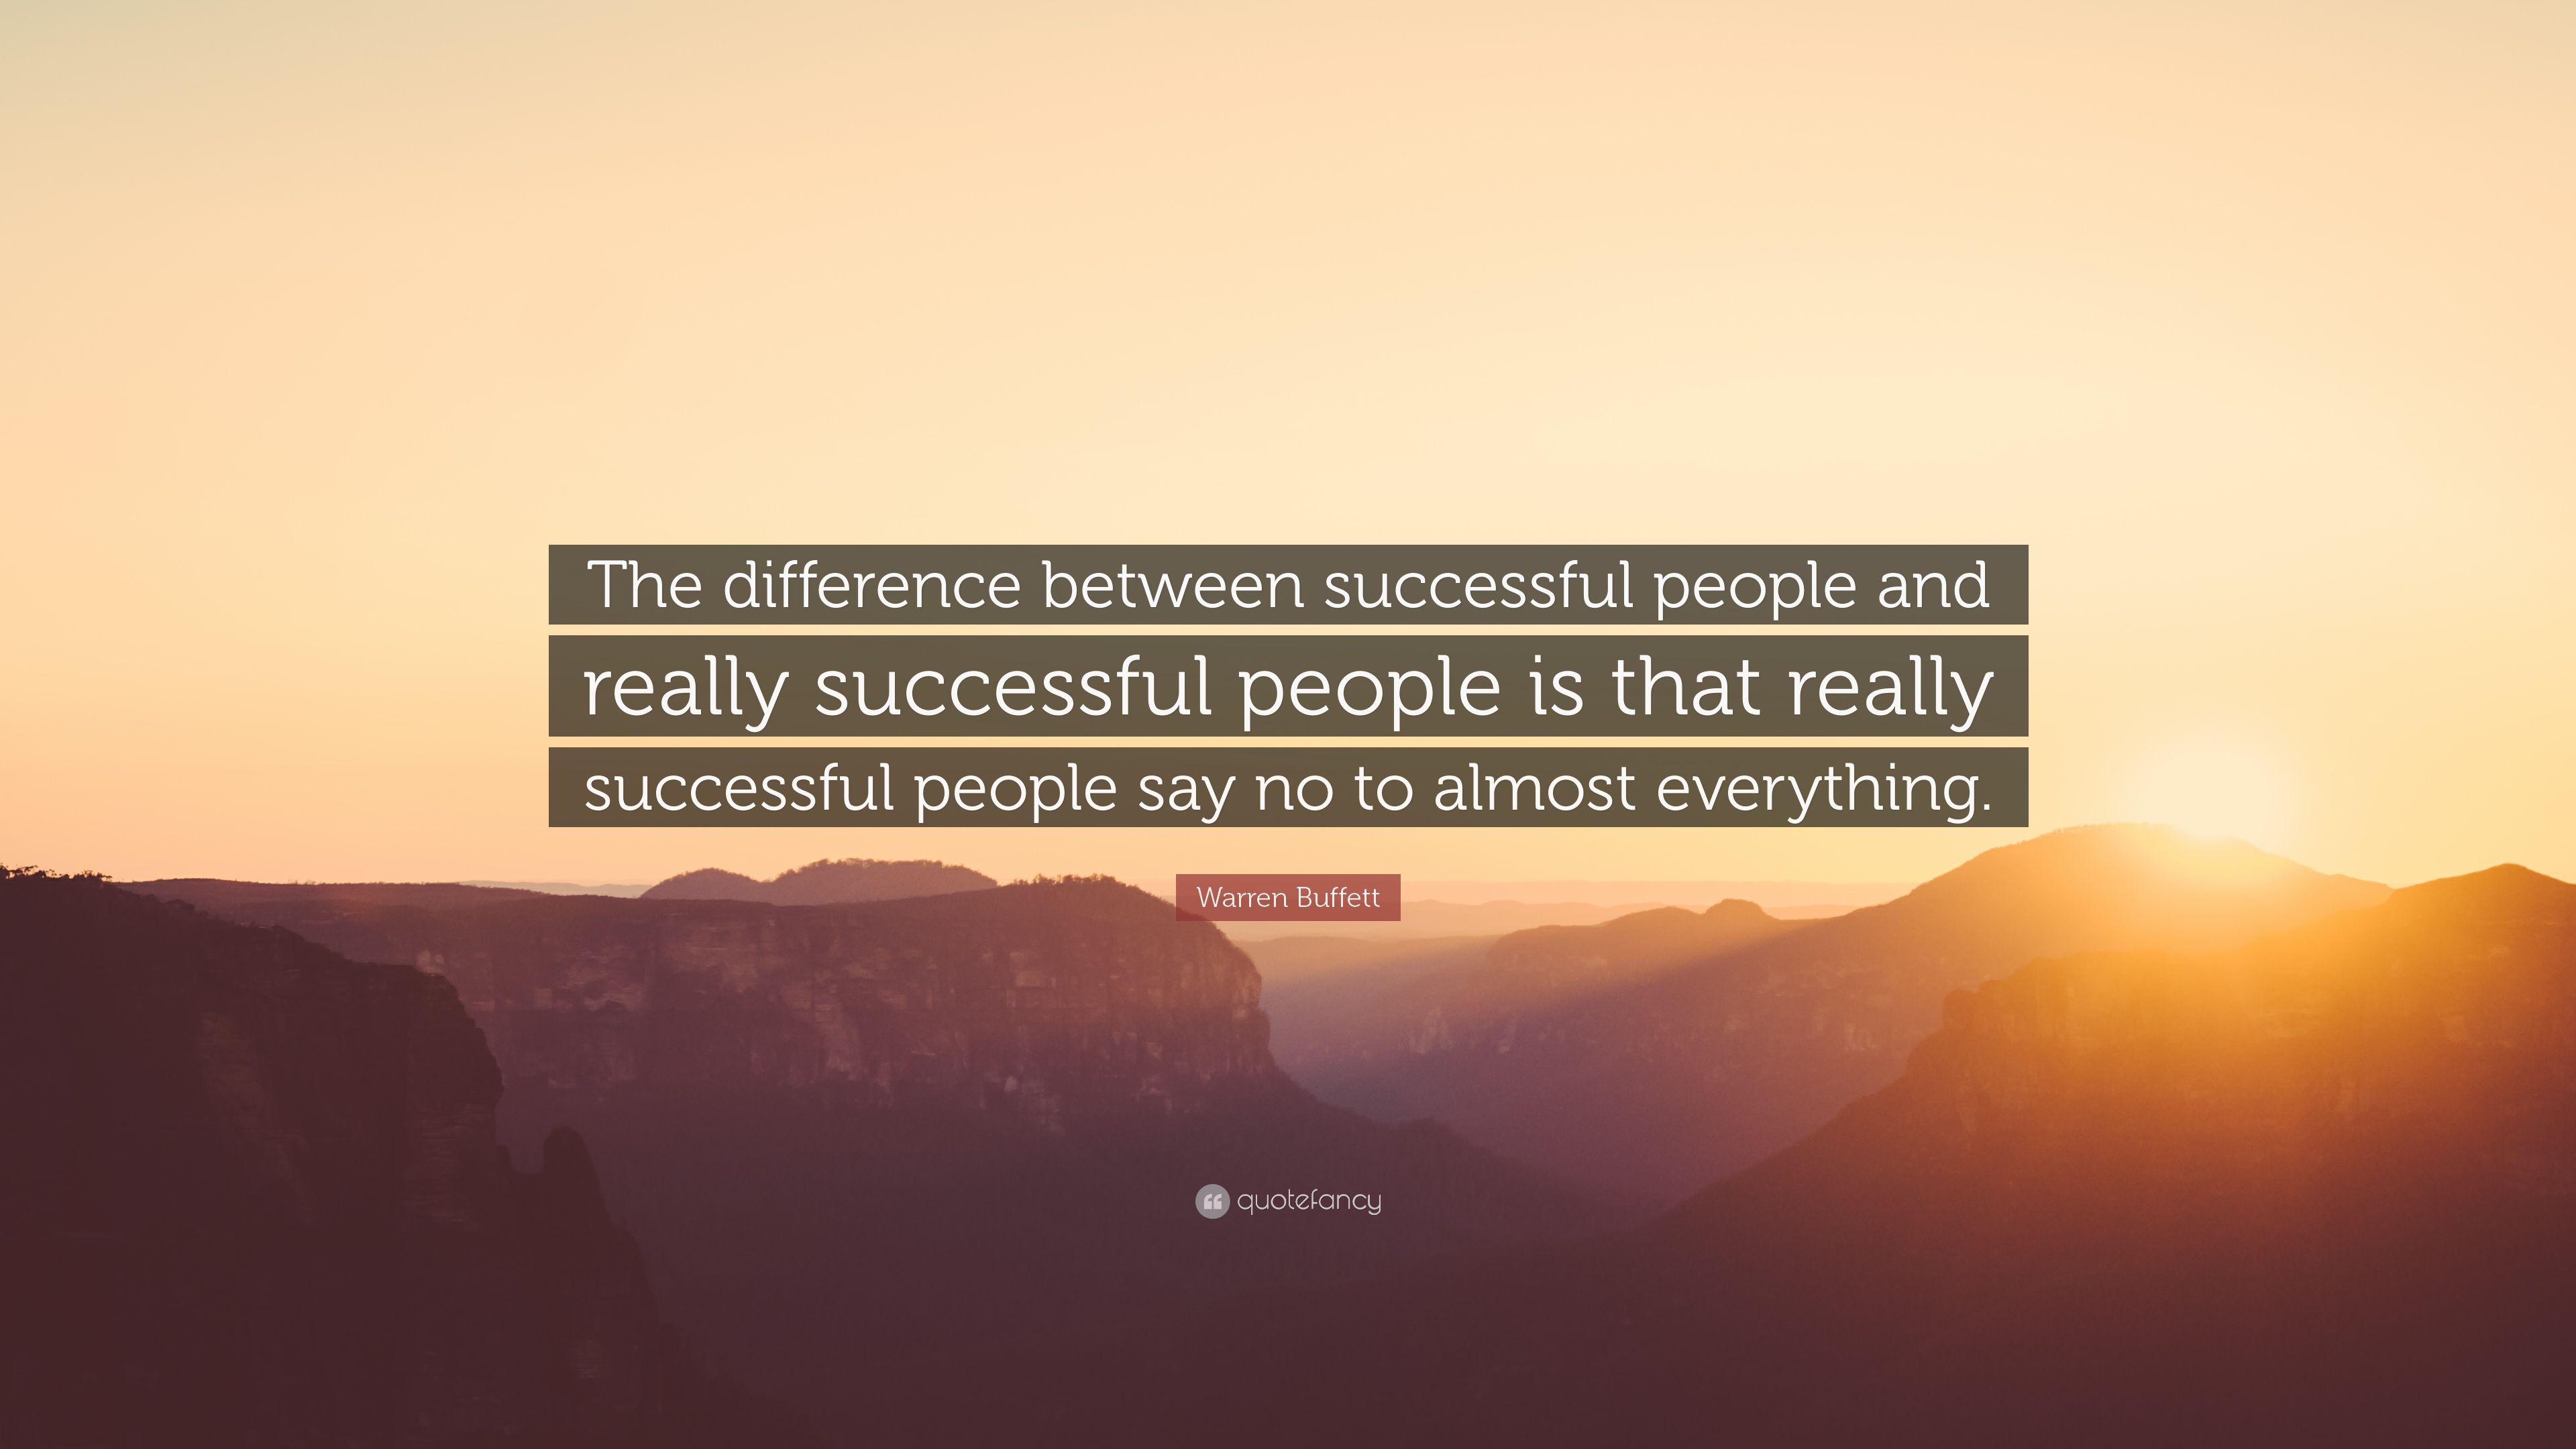 Warren Buffett Quote: “The difference between successful people and really successful people is that really successful people say no to almost .” (22 wallpaper)